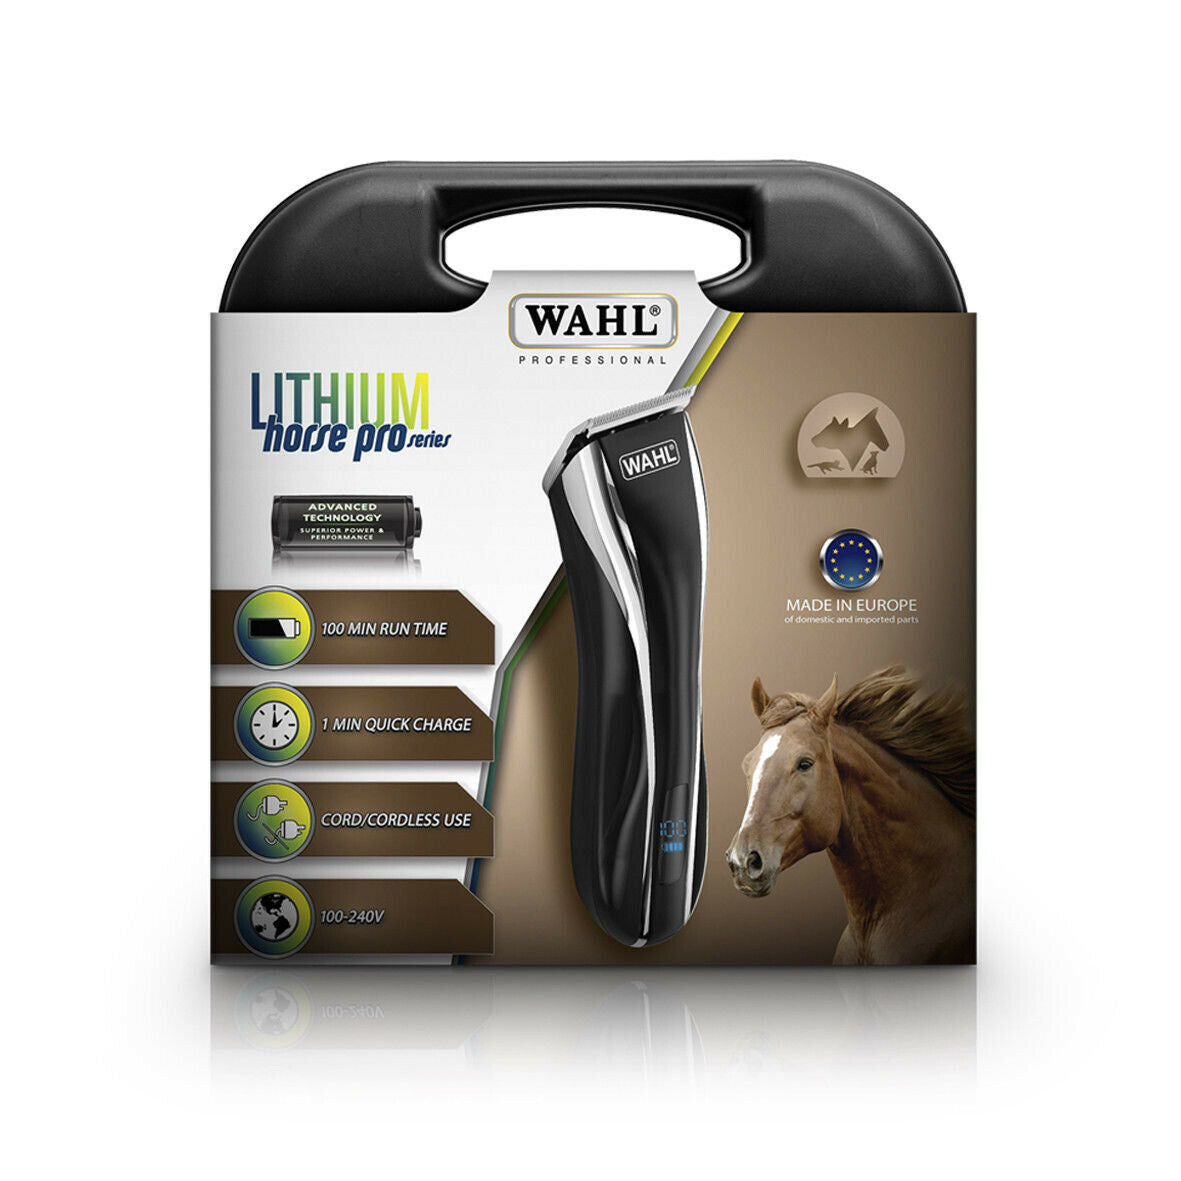 Wahl Lithium Horse Pro Clipper with 5 in 1 Blade